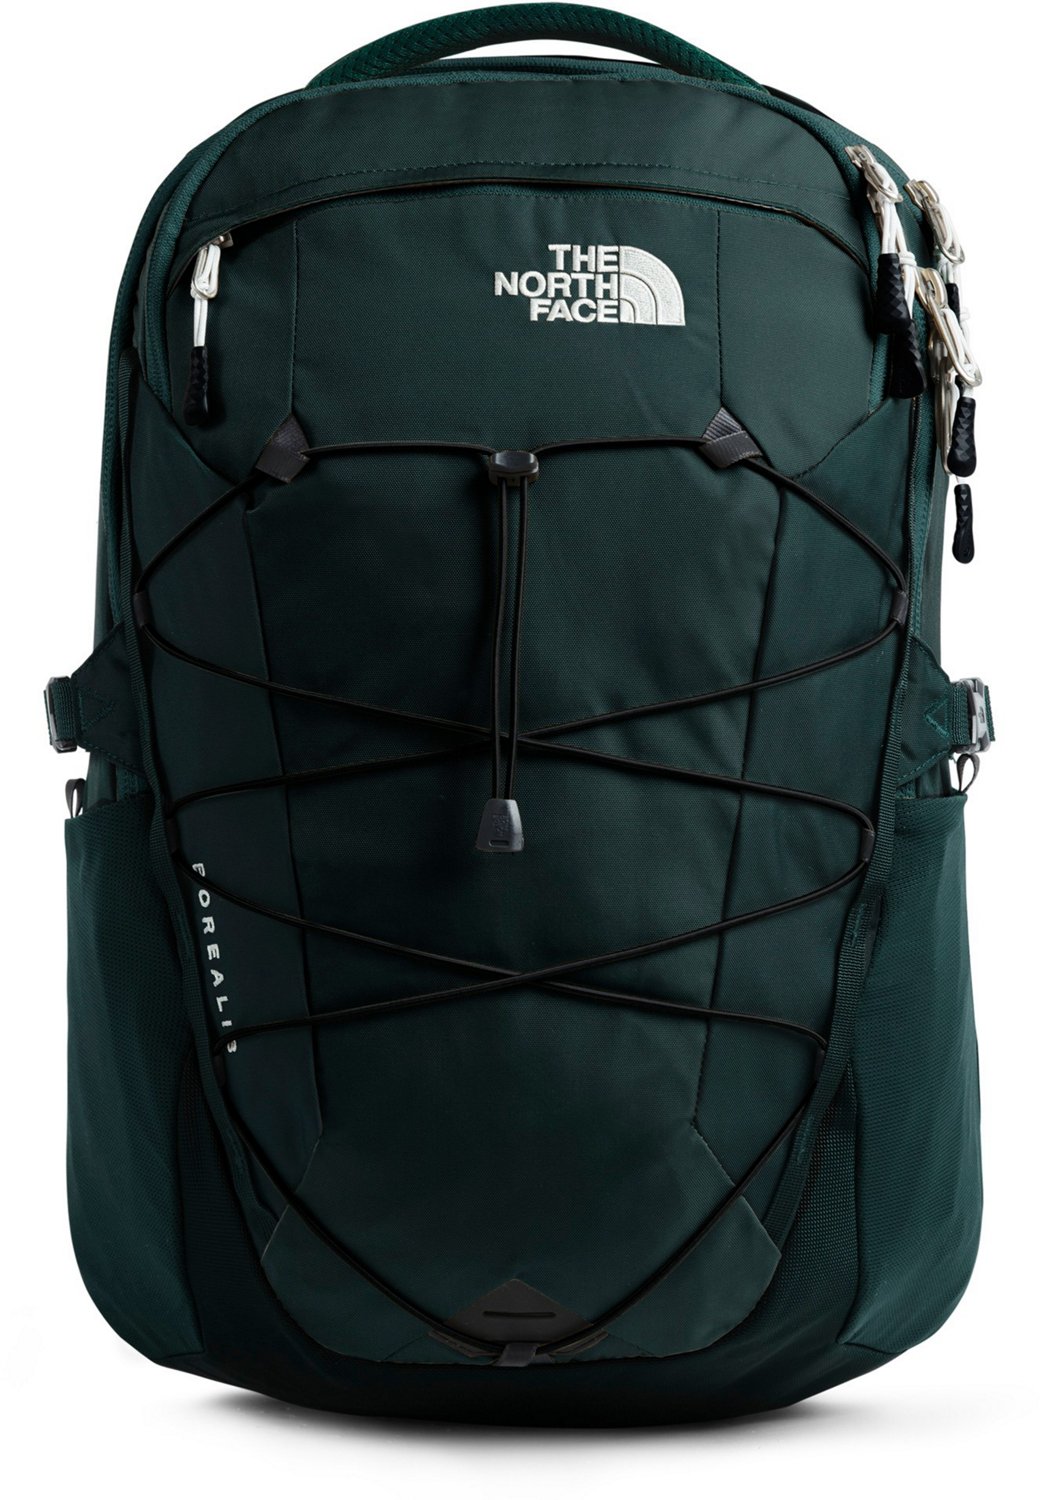 The North Face Borealis Backpack | Academy